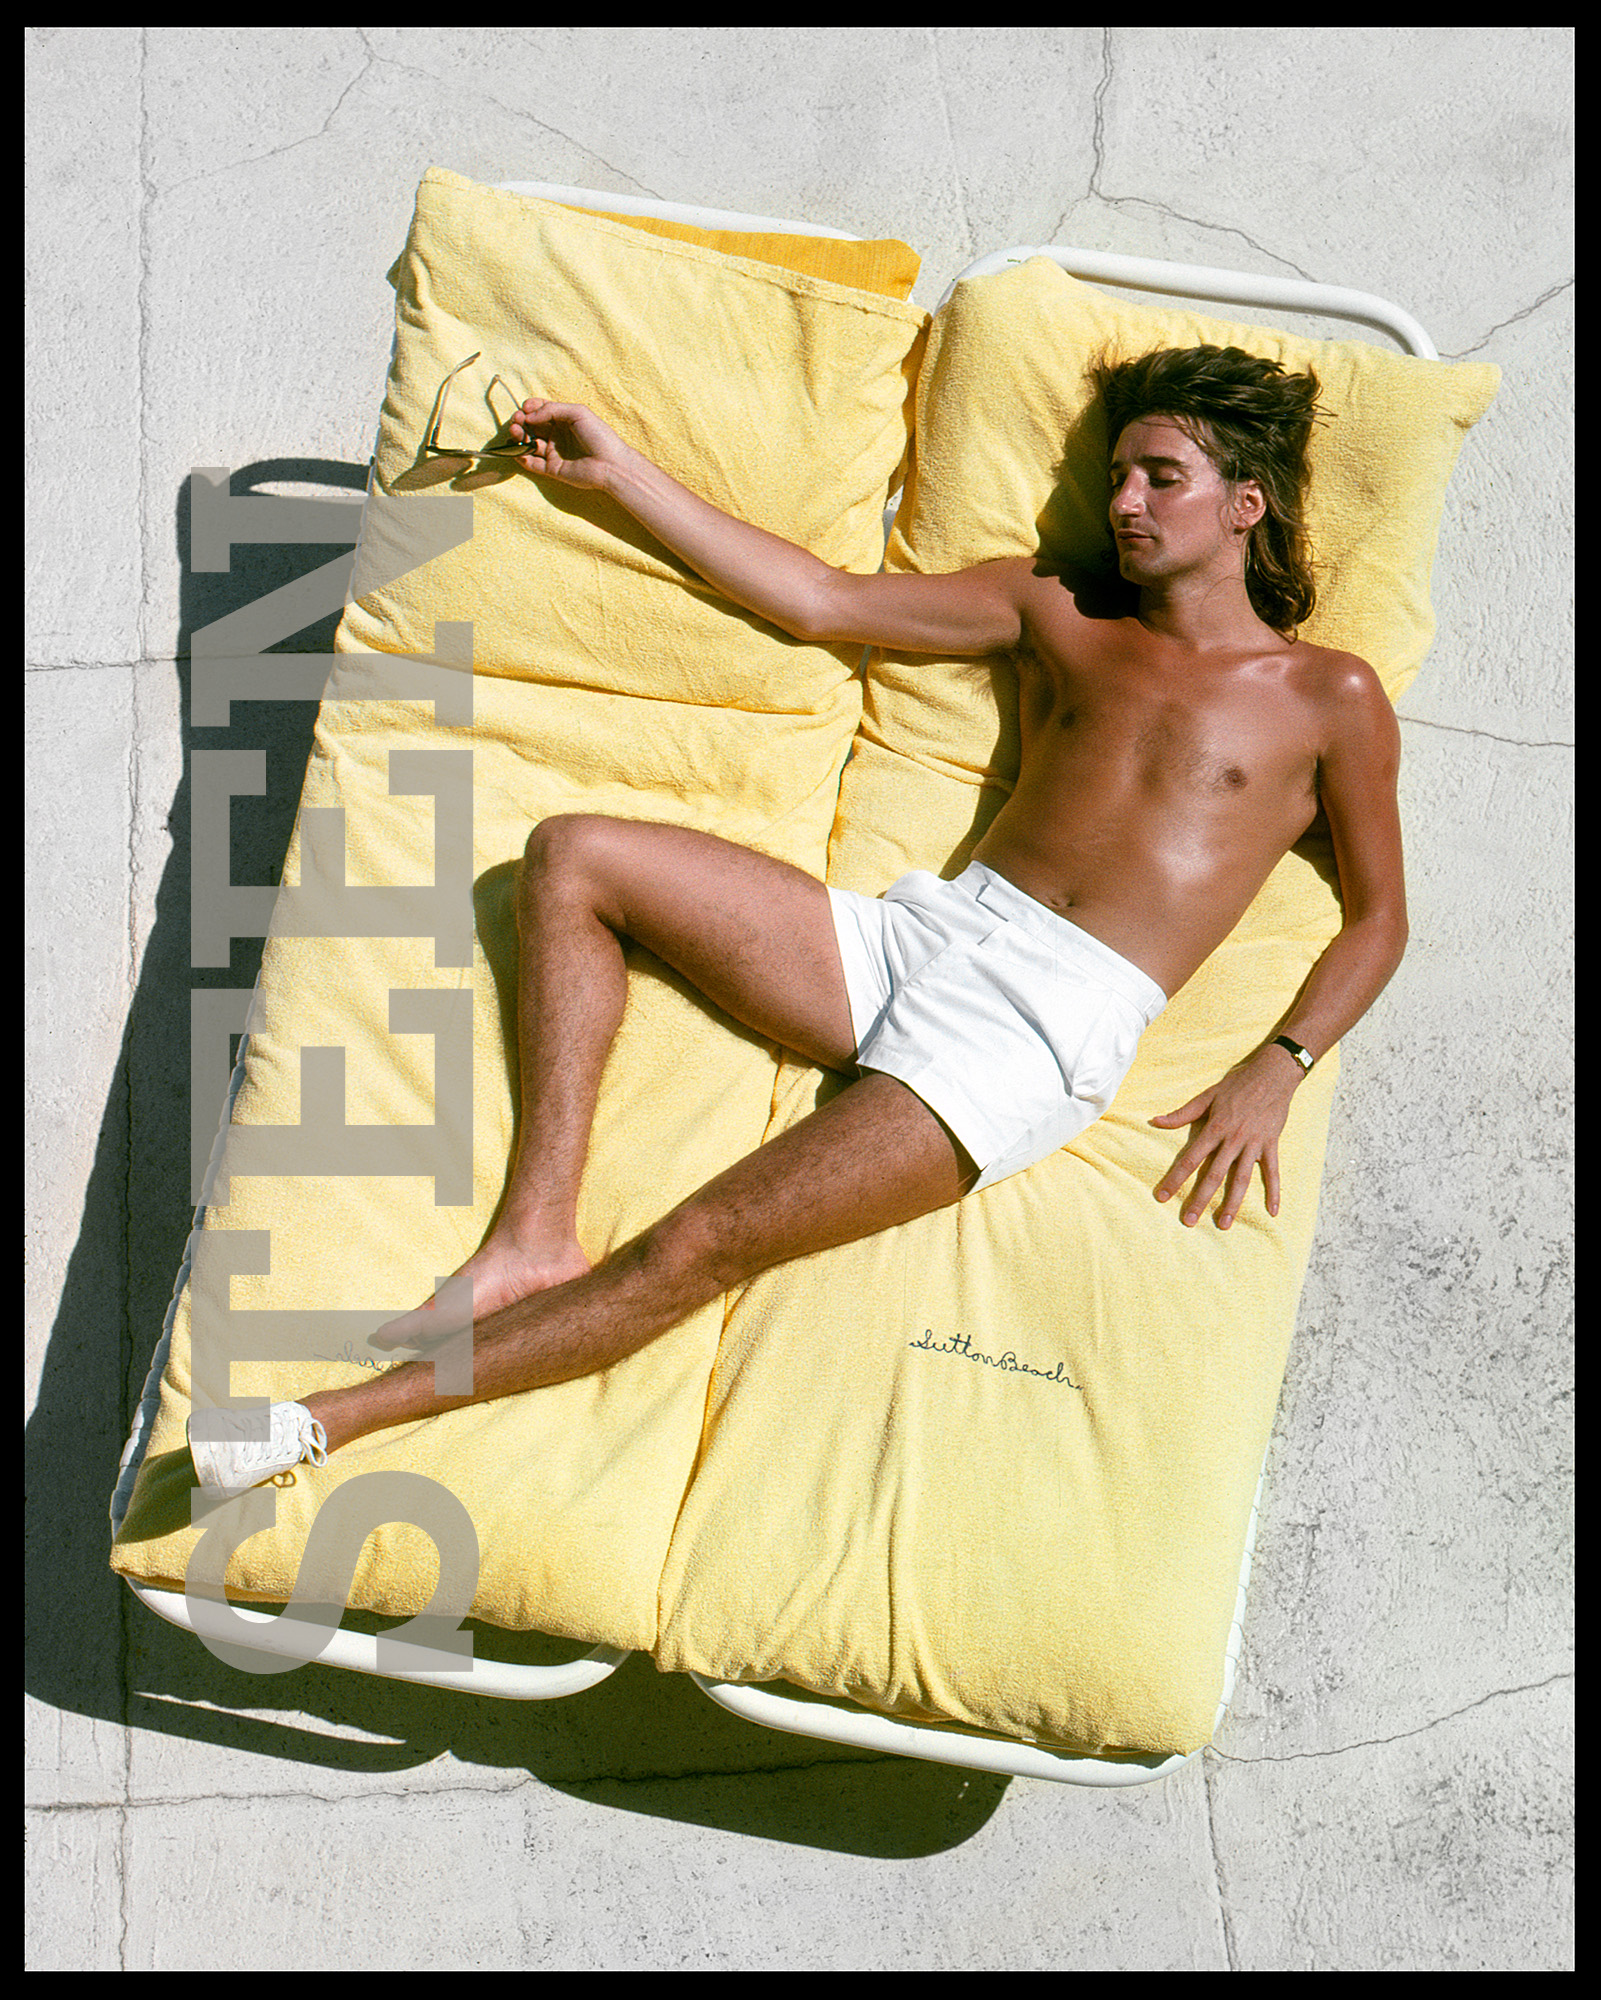 an exclusive limited edition colour photograph of rod stewart sunbathing by british photographer david steen